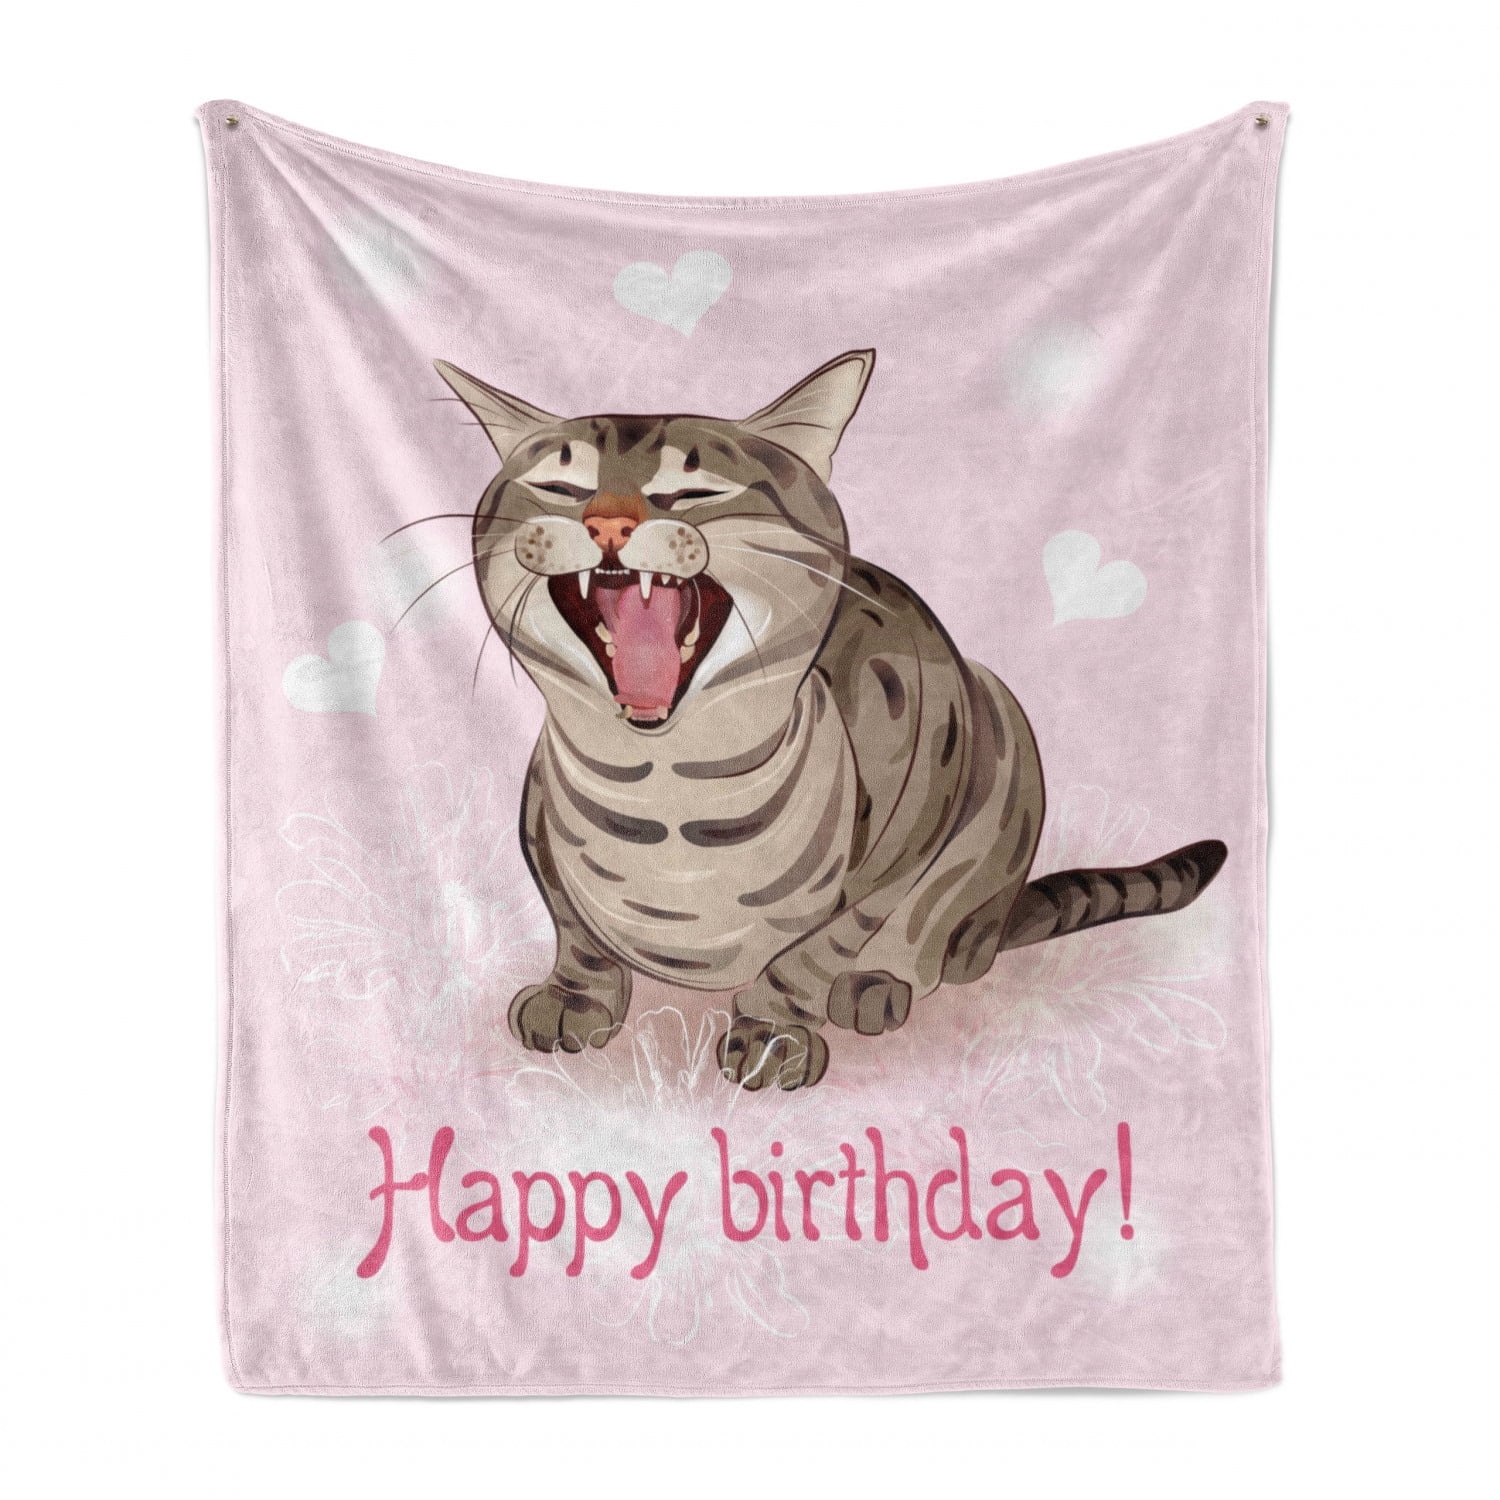 60 x 80 Cozy Plush for Indoor and Outdoor Use Ambesonne Birthday Soft Flannel Fleece Throw Blanket Baby Pink Brown Funny Cat Sings a Greeting Song on Pink Color Backdrop with Hearts Flowers